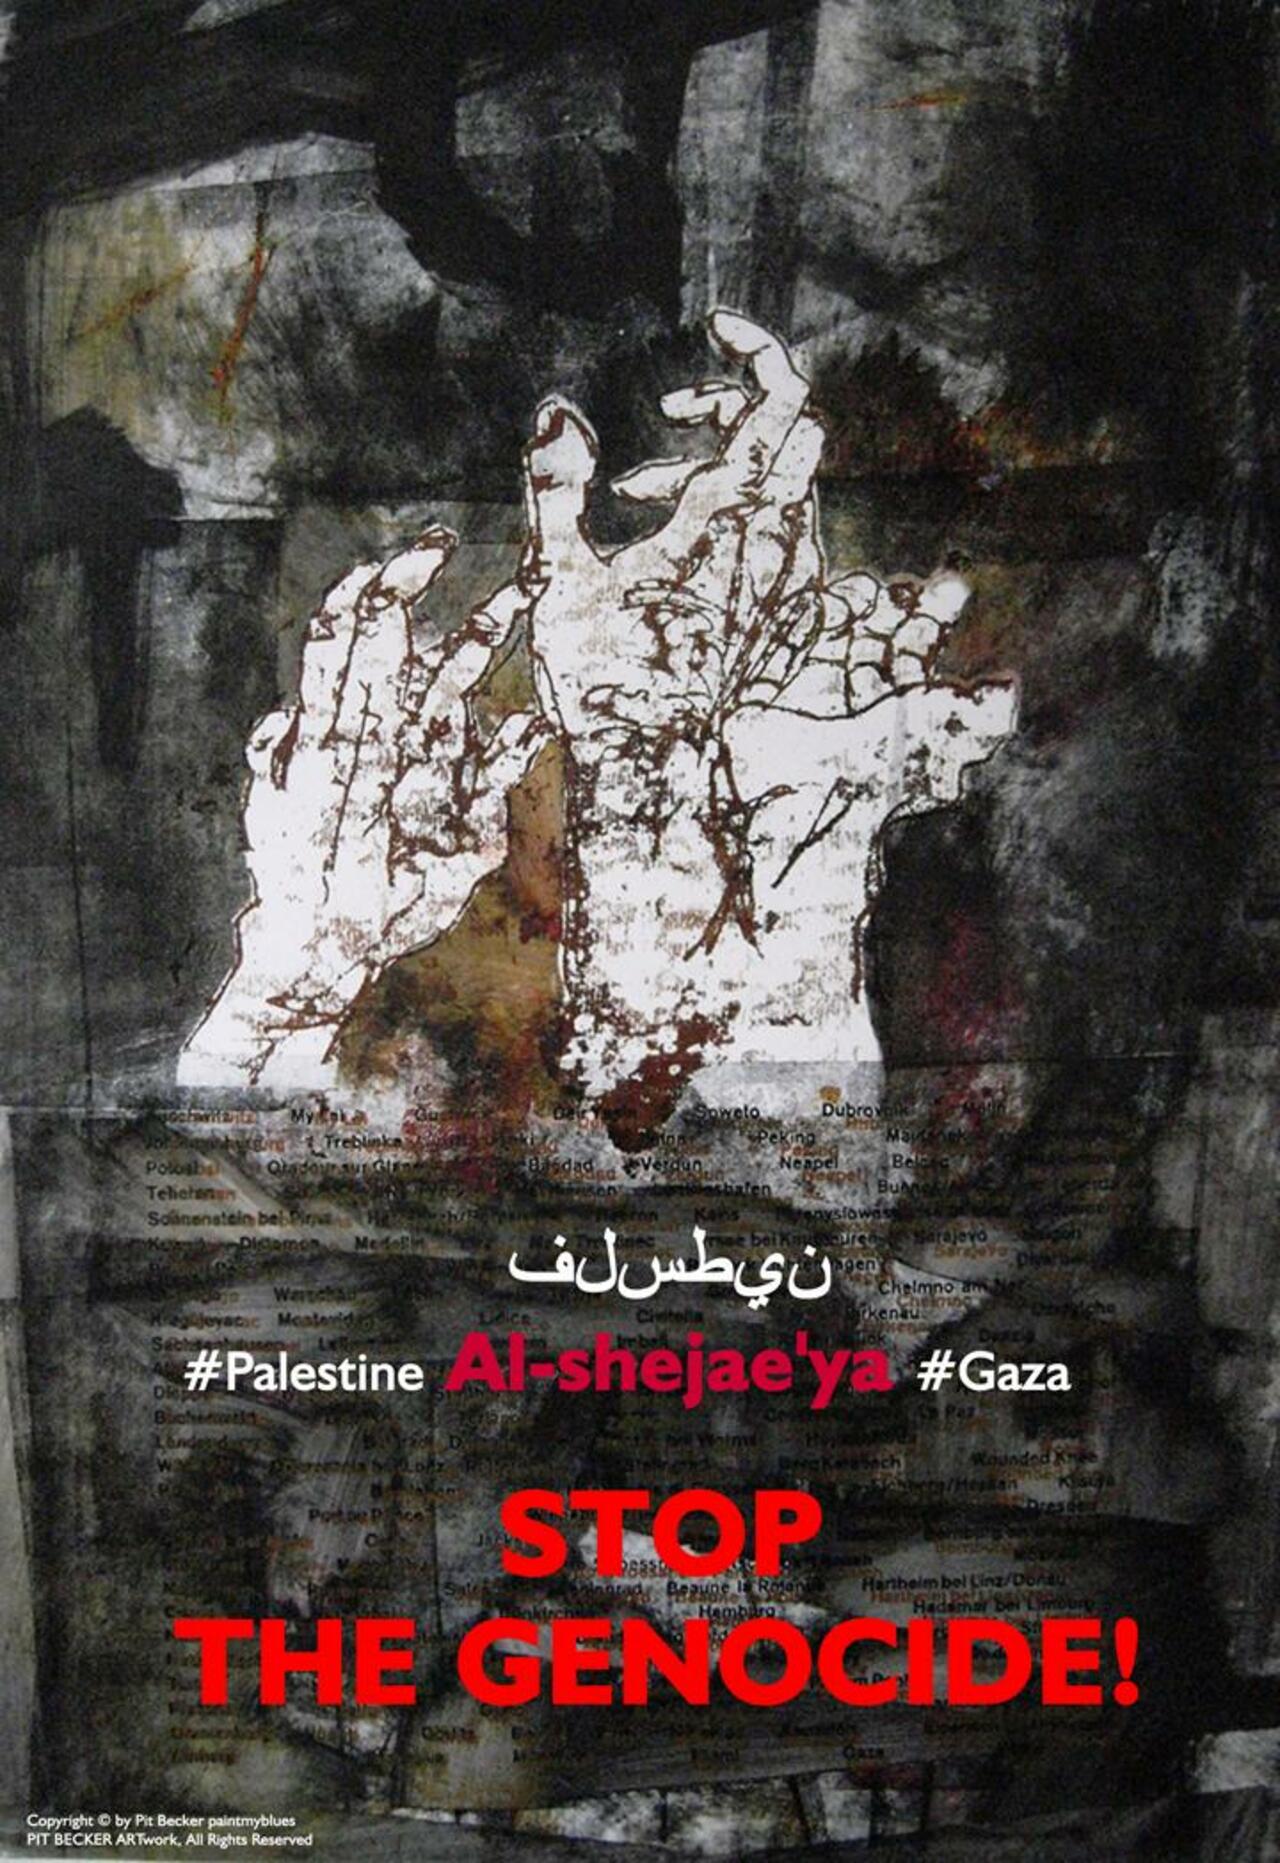 #Gaza #Art #HumanRights #Music #Graffiti #Painting #Theater #Ballet #Film #Literature I like to share with you: http://t.co/VjxE513eJQ